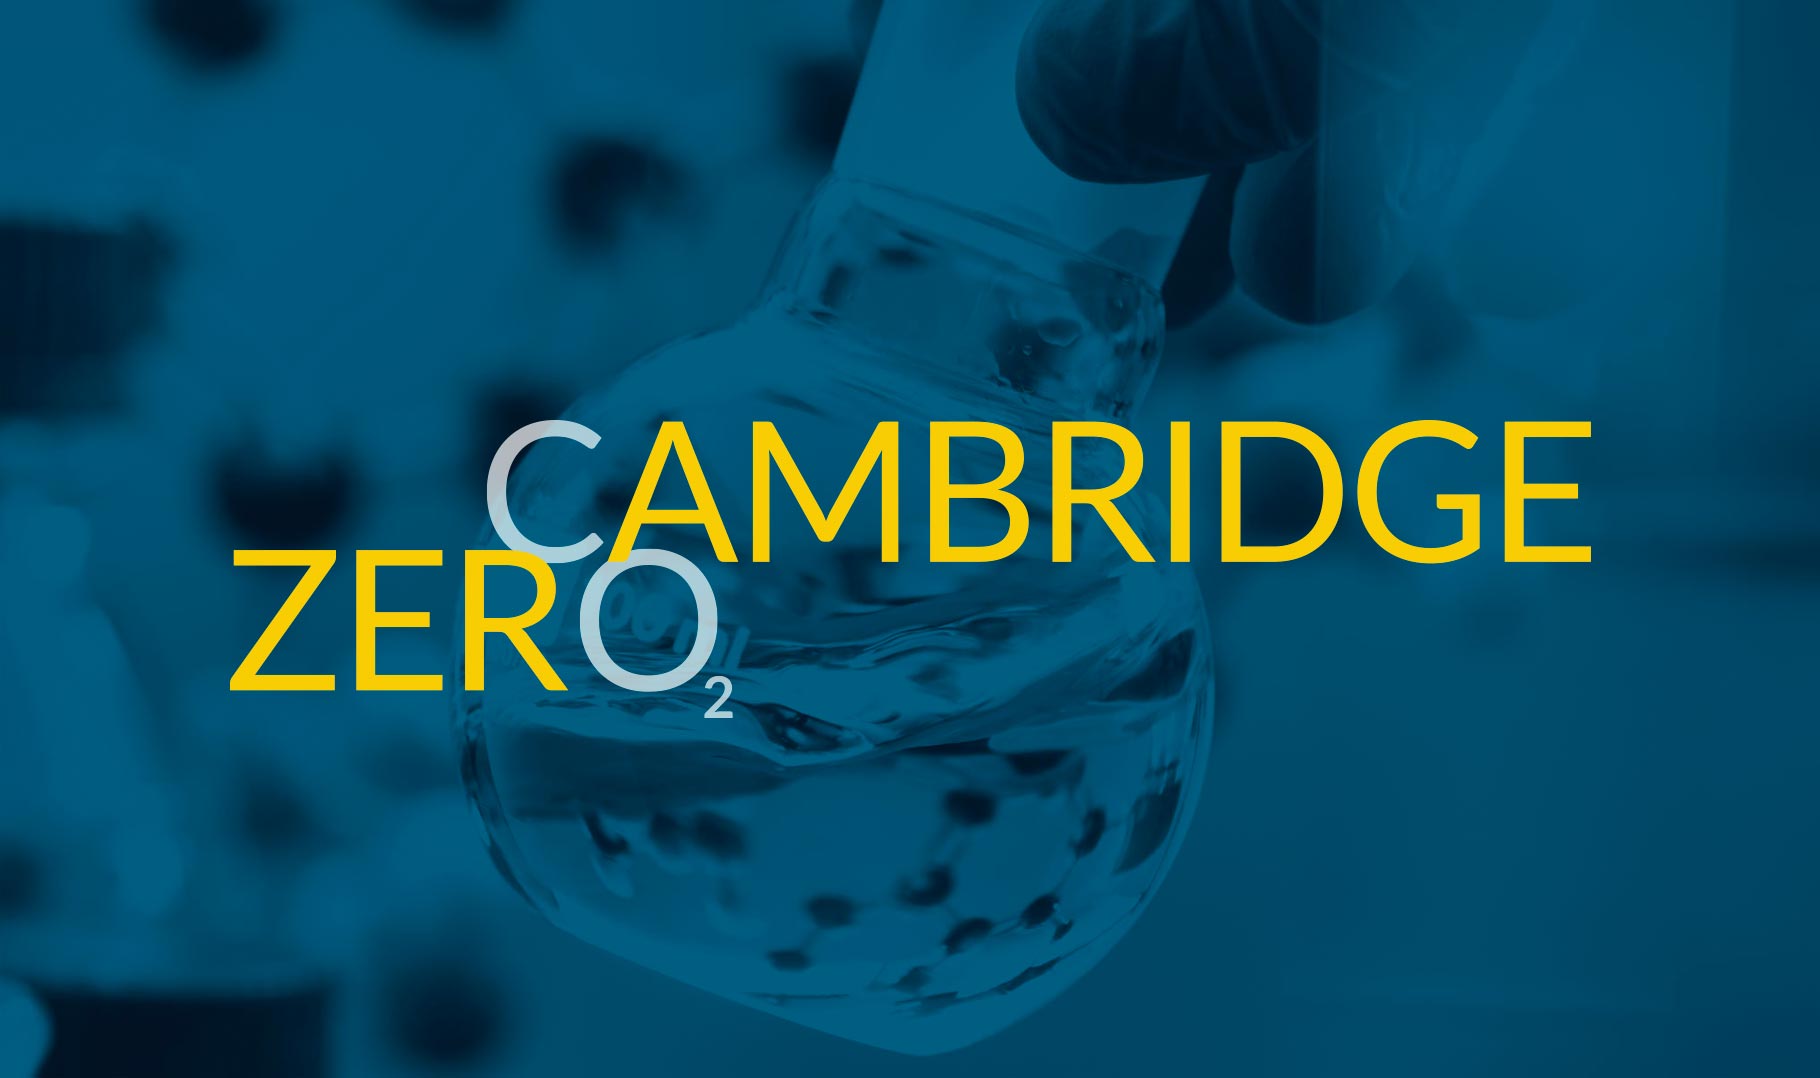 Cambridge Zero is a new climate change initiative from the University of Cambridge